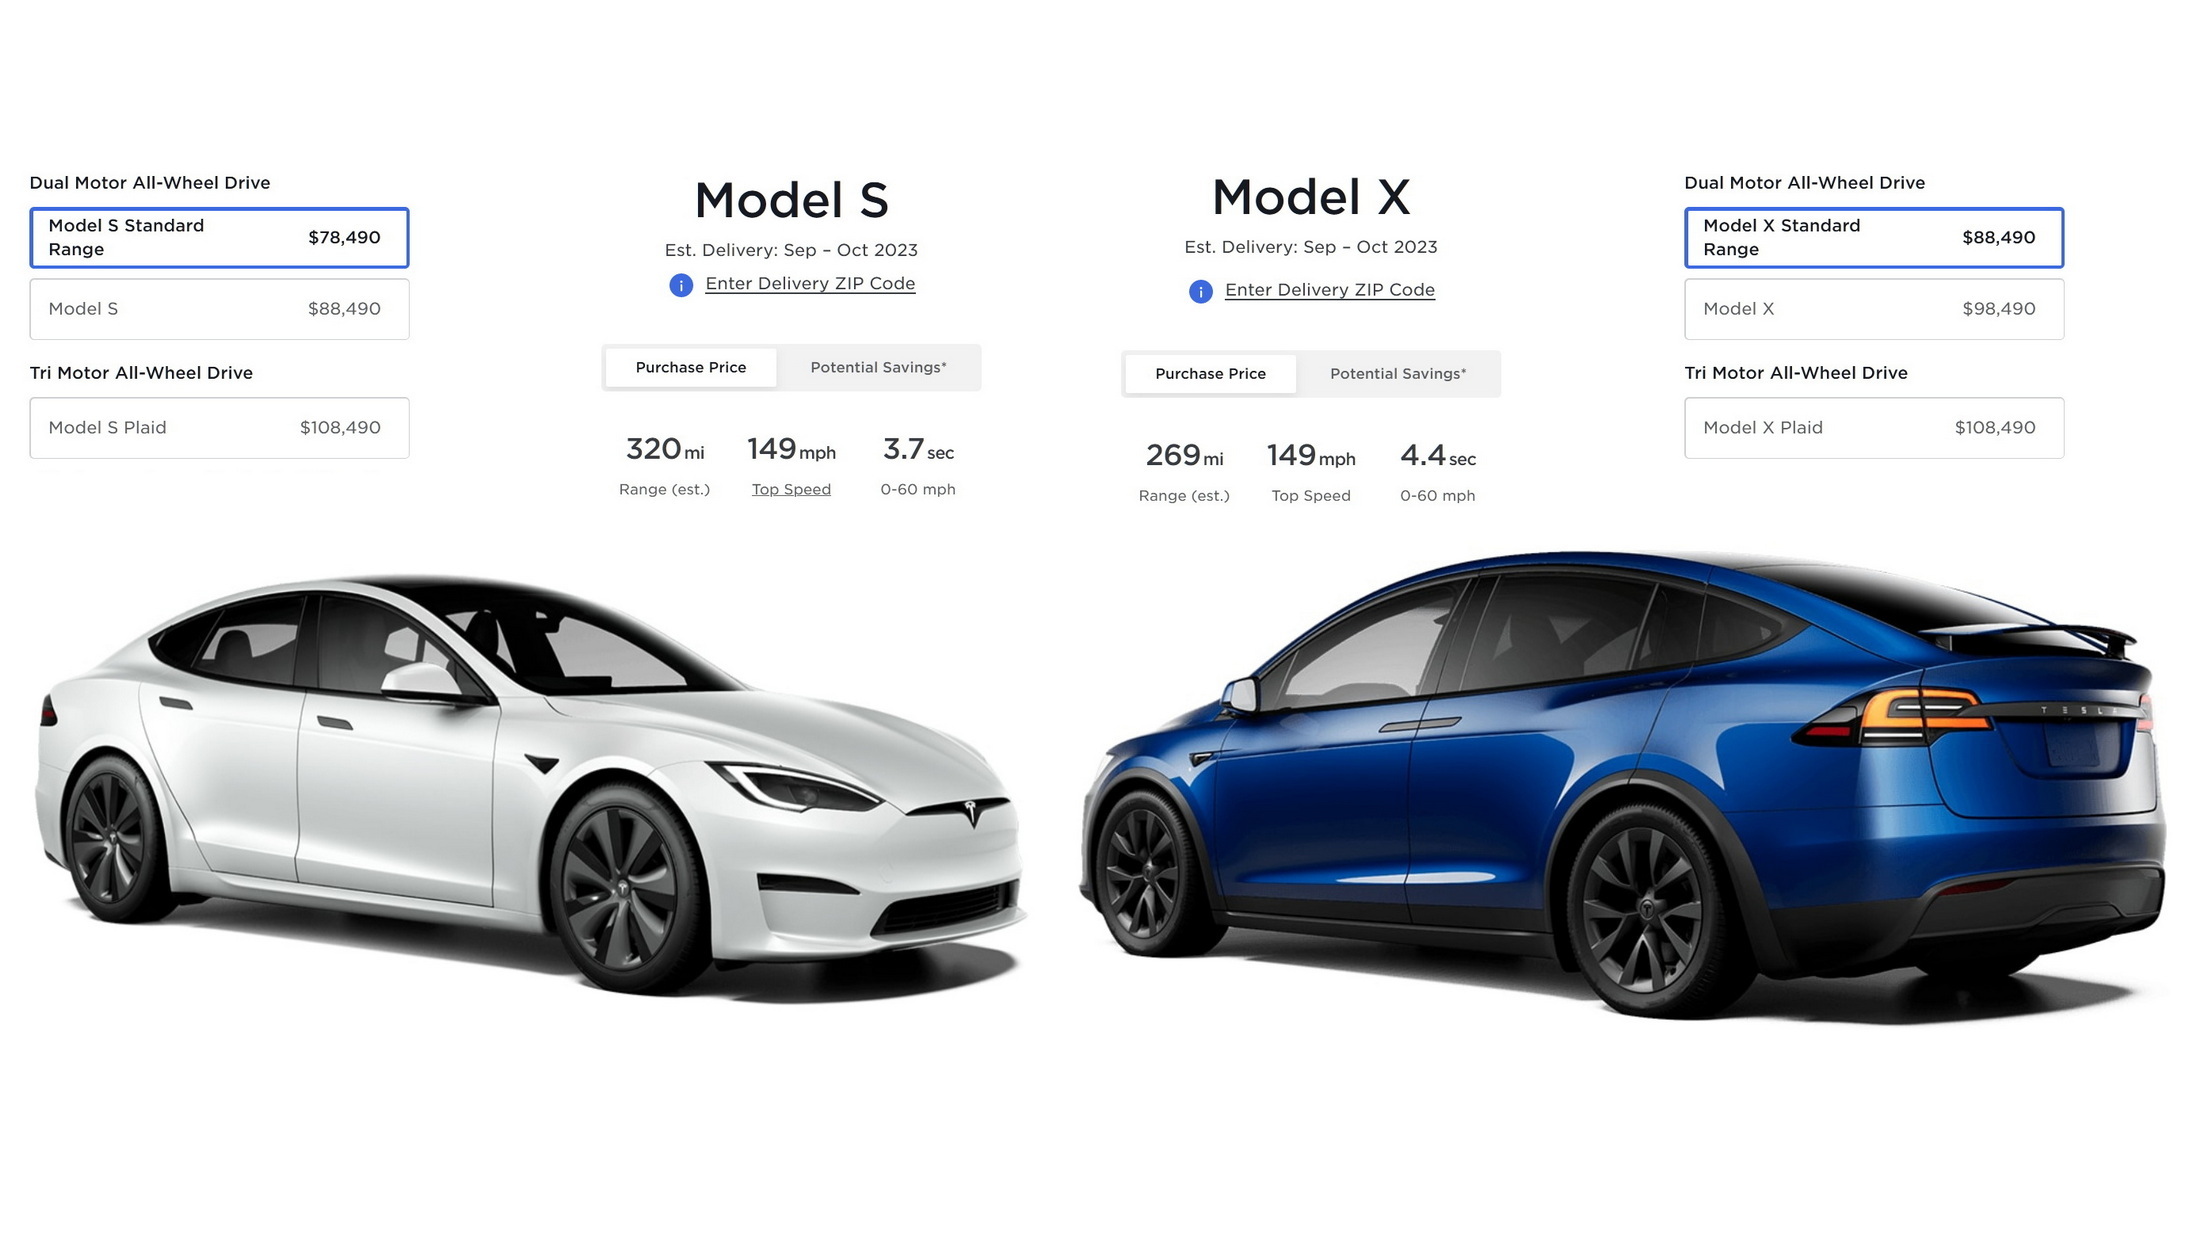 Tesla will not 'refresh' its Model S or Model X electric vehicles